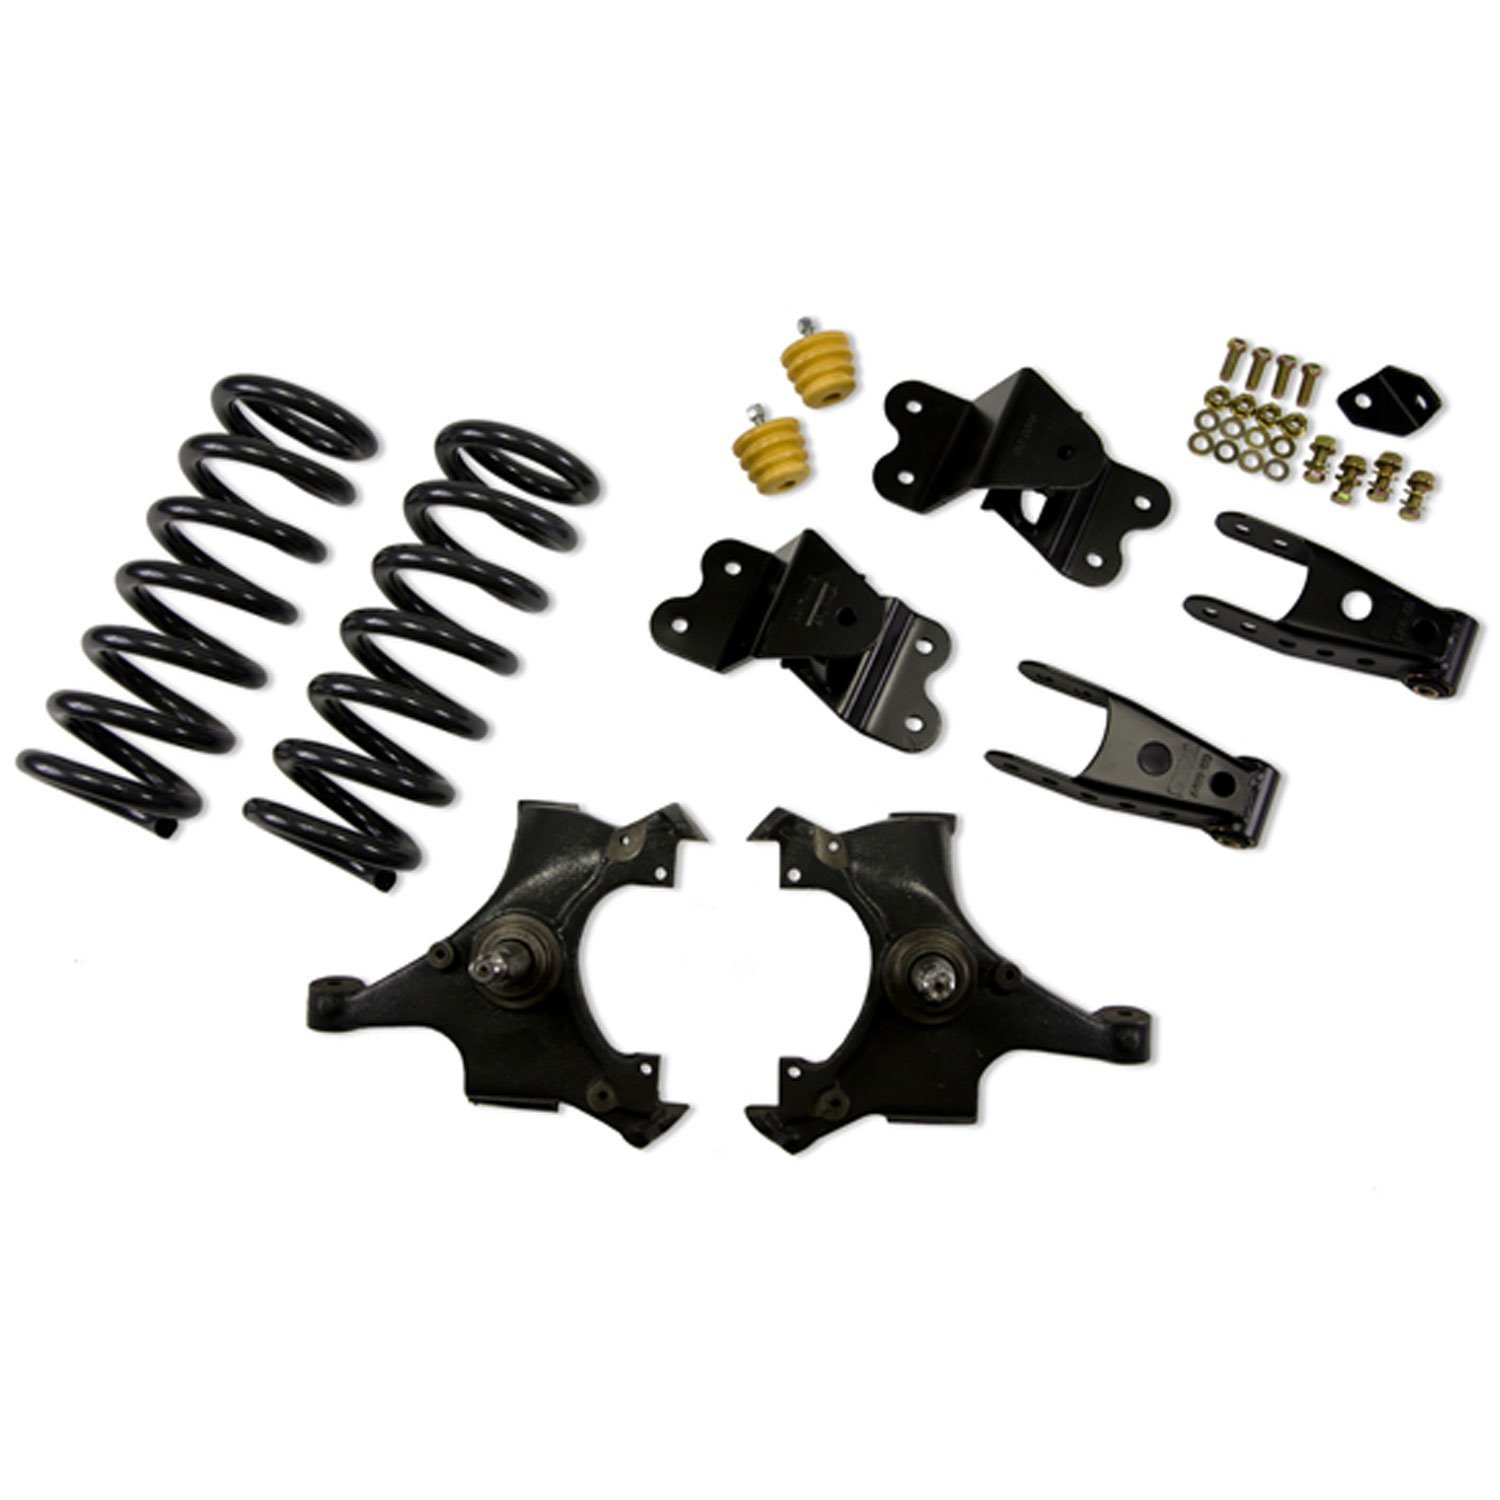 Complete Lowering Kit for 1988-1991 Chevy/GMC 1500